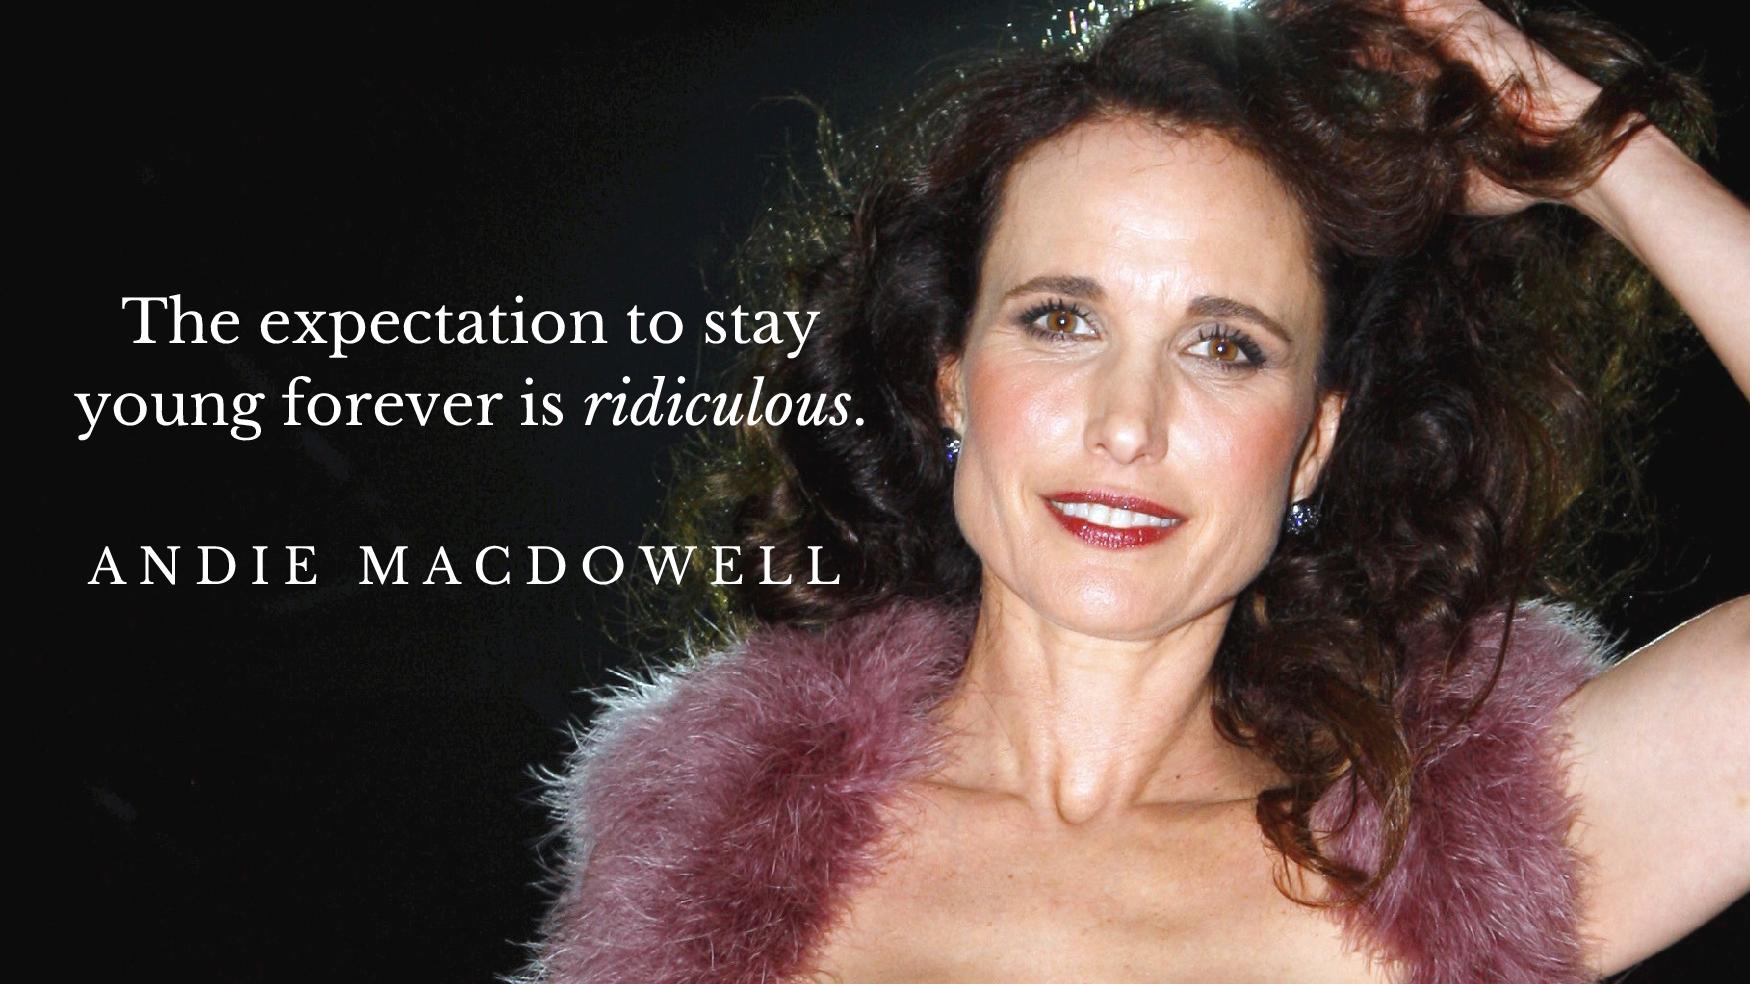 andie macdowell quote